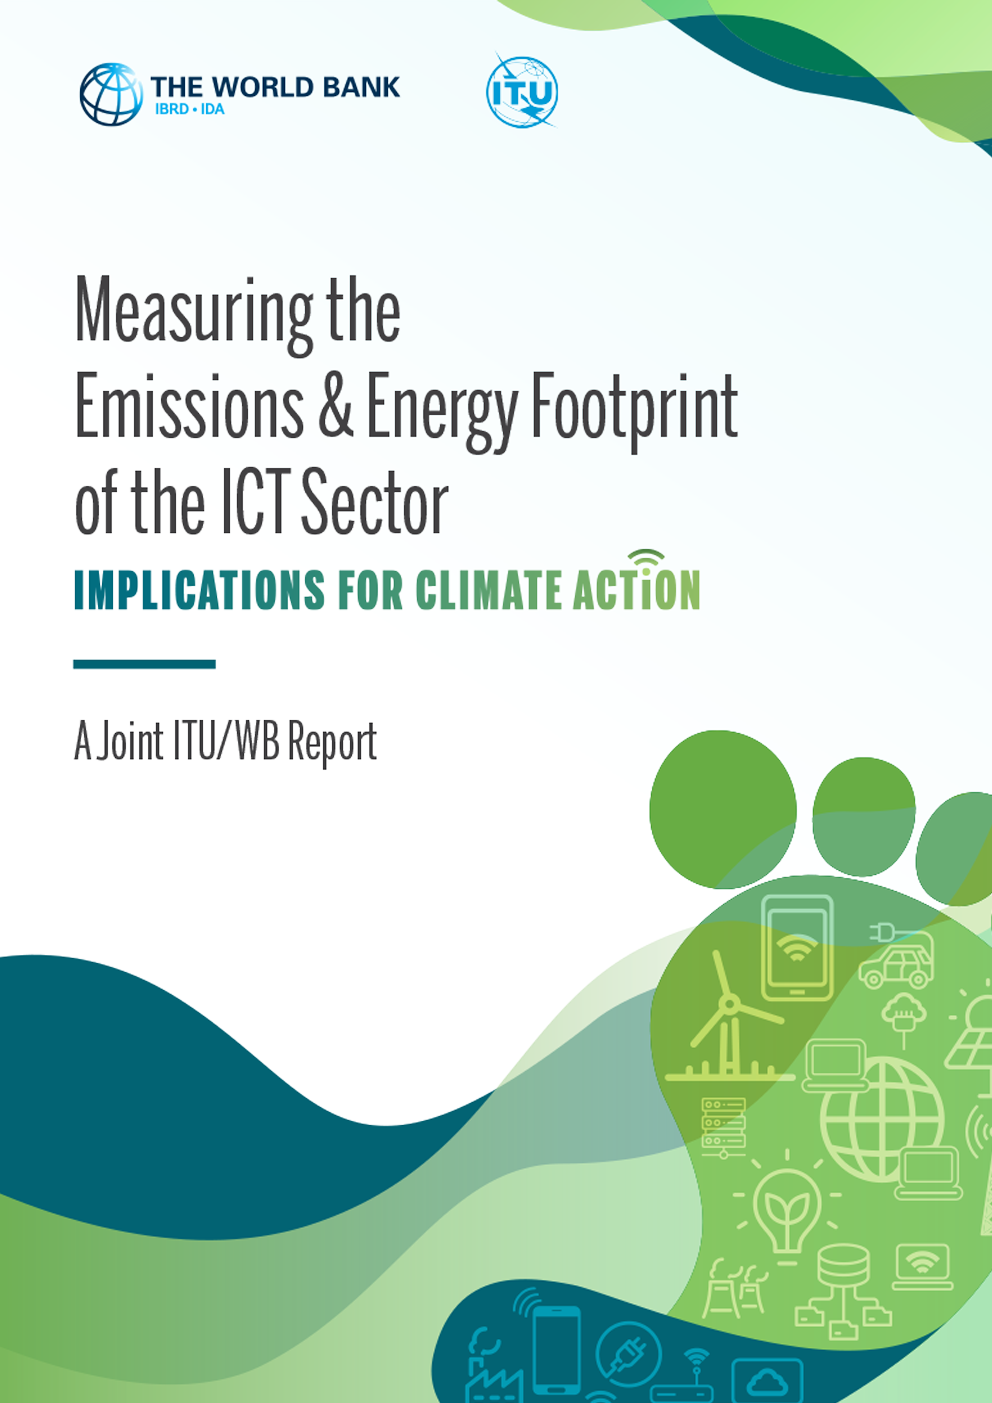 Measuring the Emission & Energy Footprint of the ICT Sector